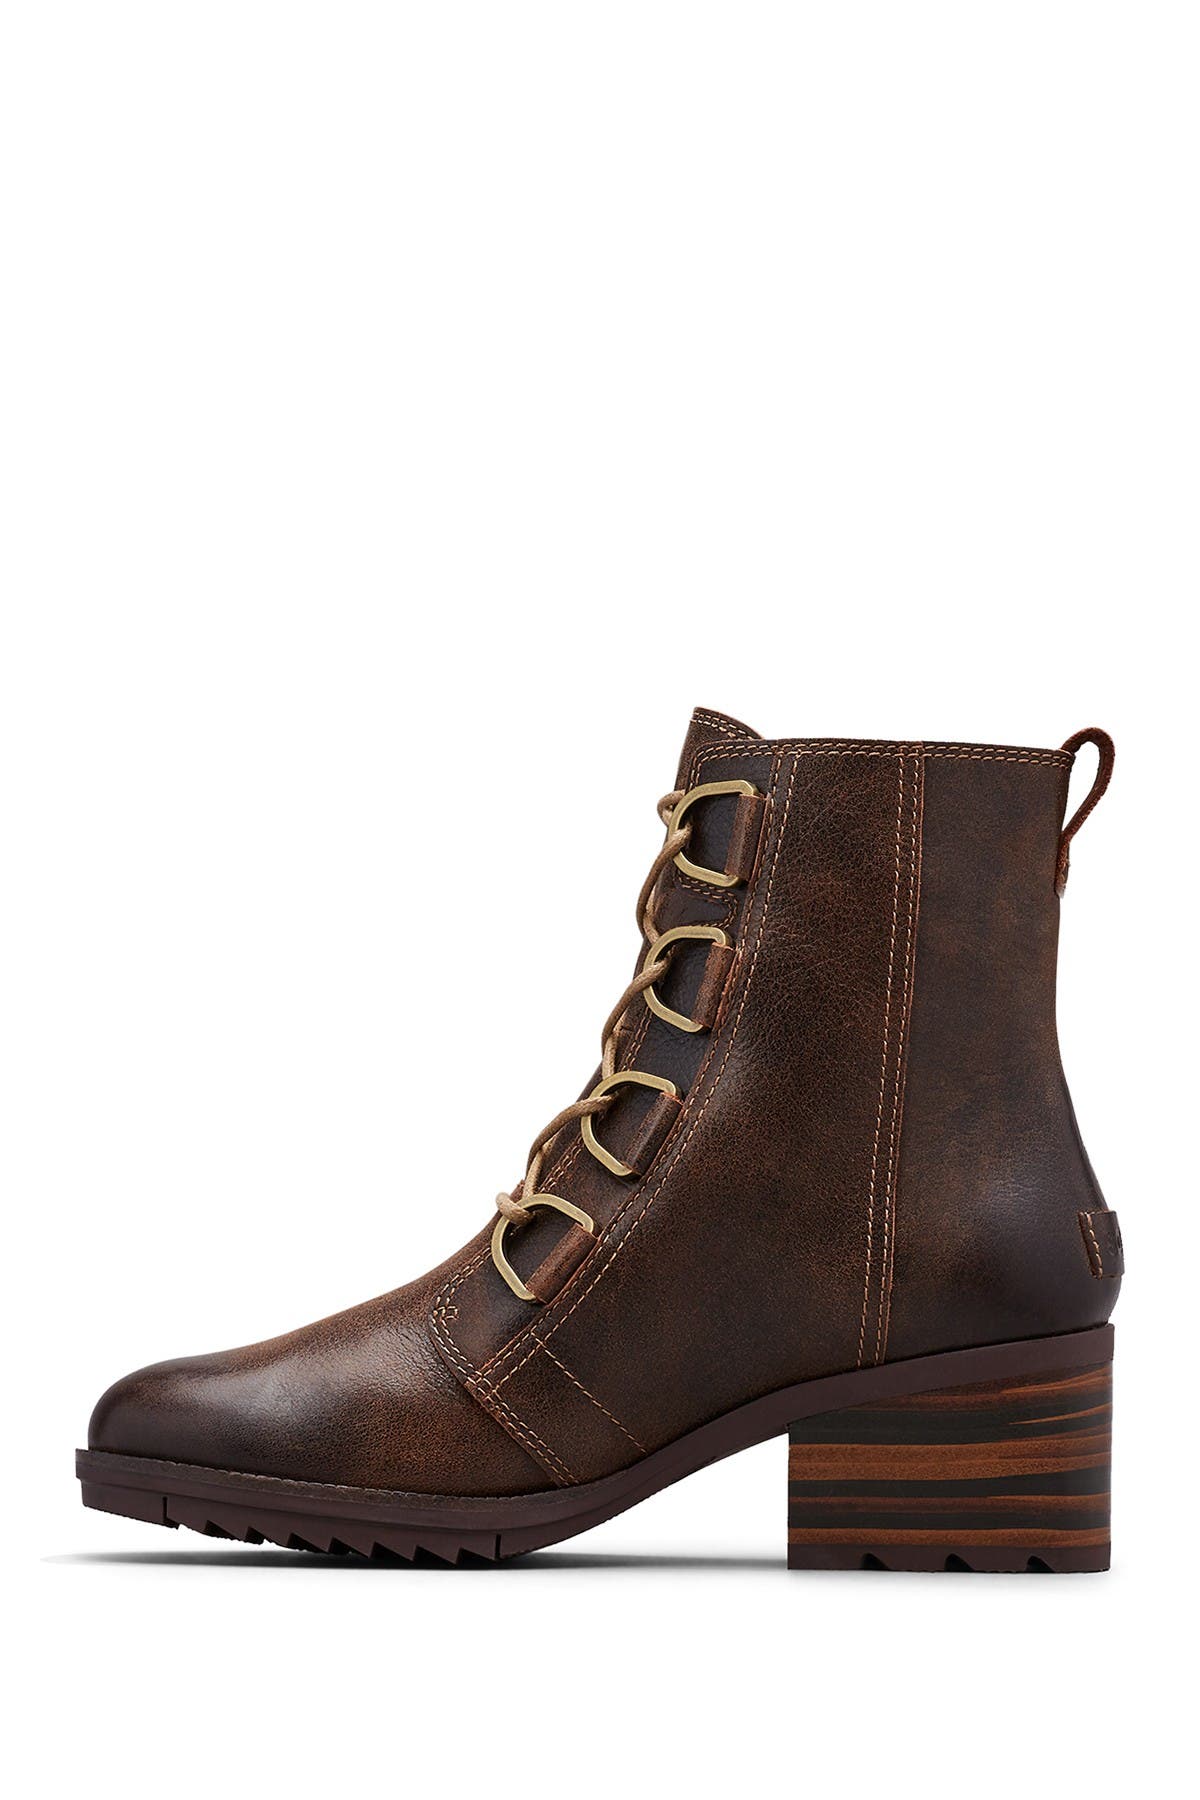 sorel cate lace up boot